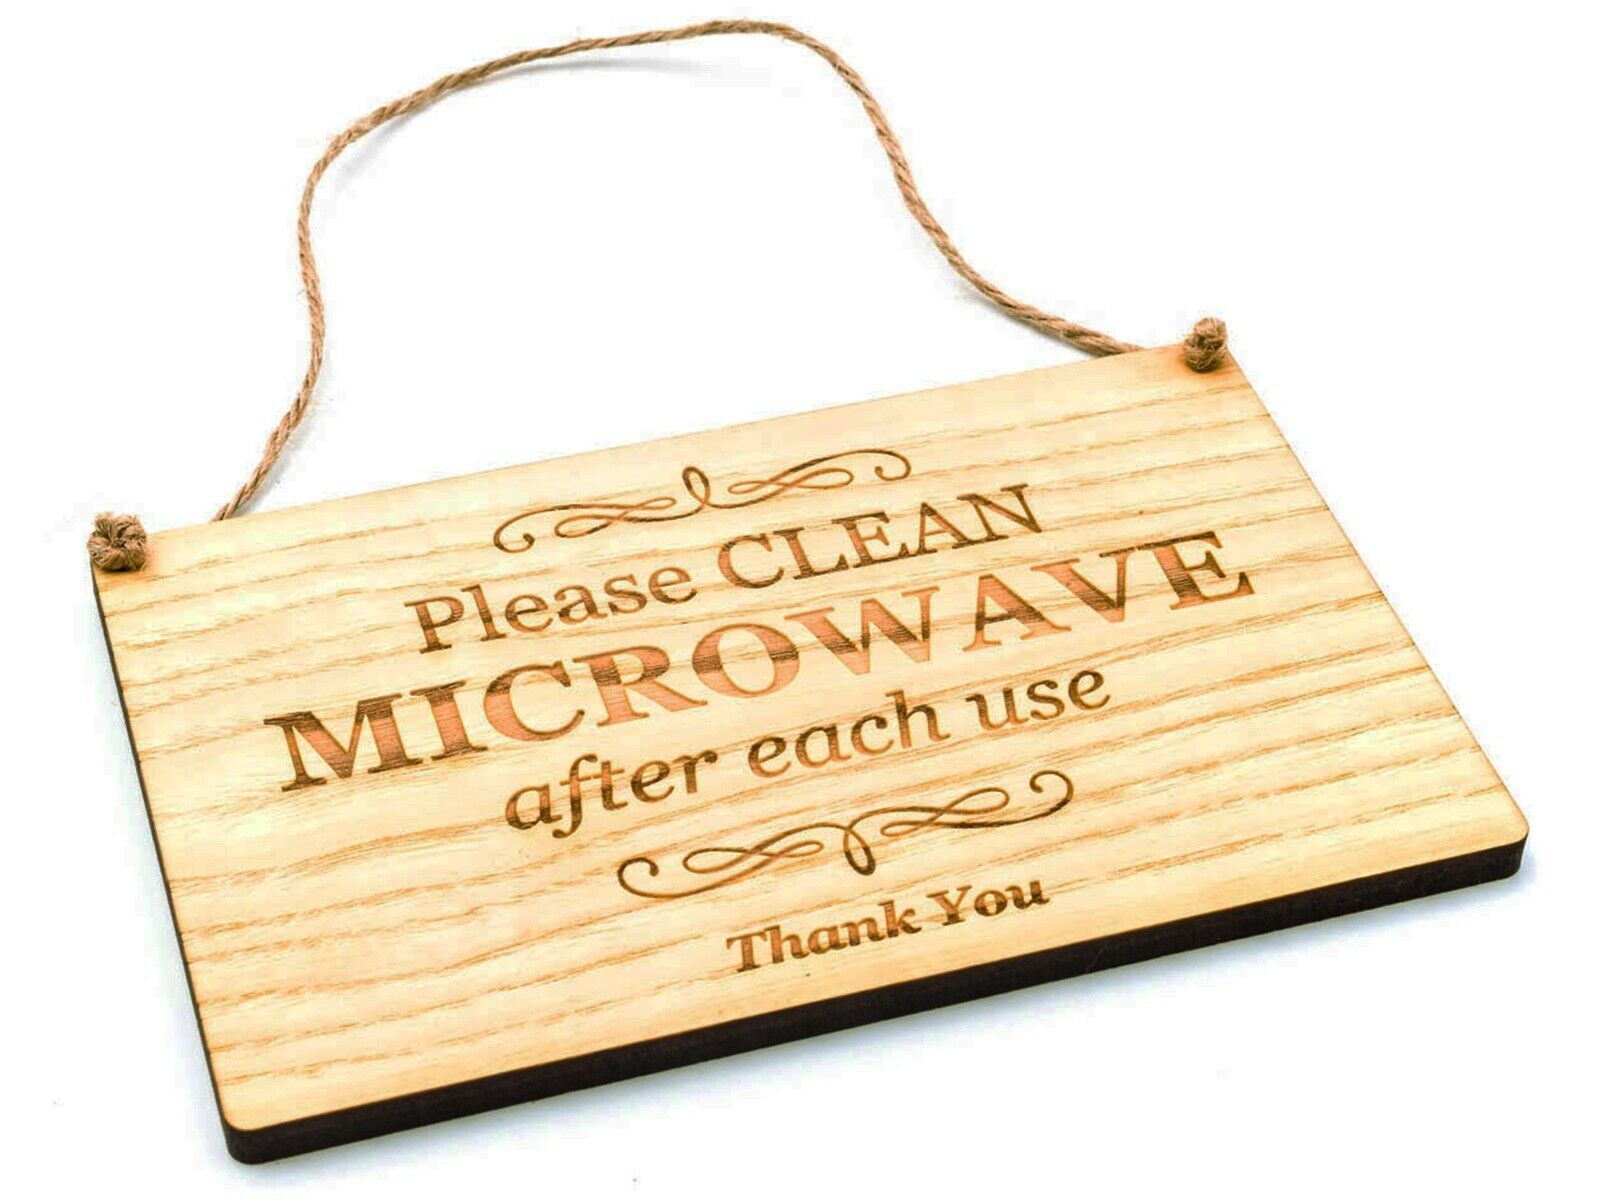 Please Clean Microwave After Each Use - Kitchen Engraved Sign, in wood